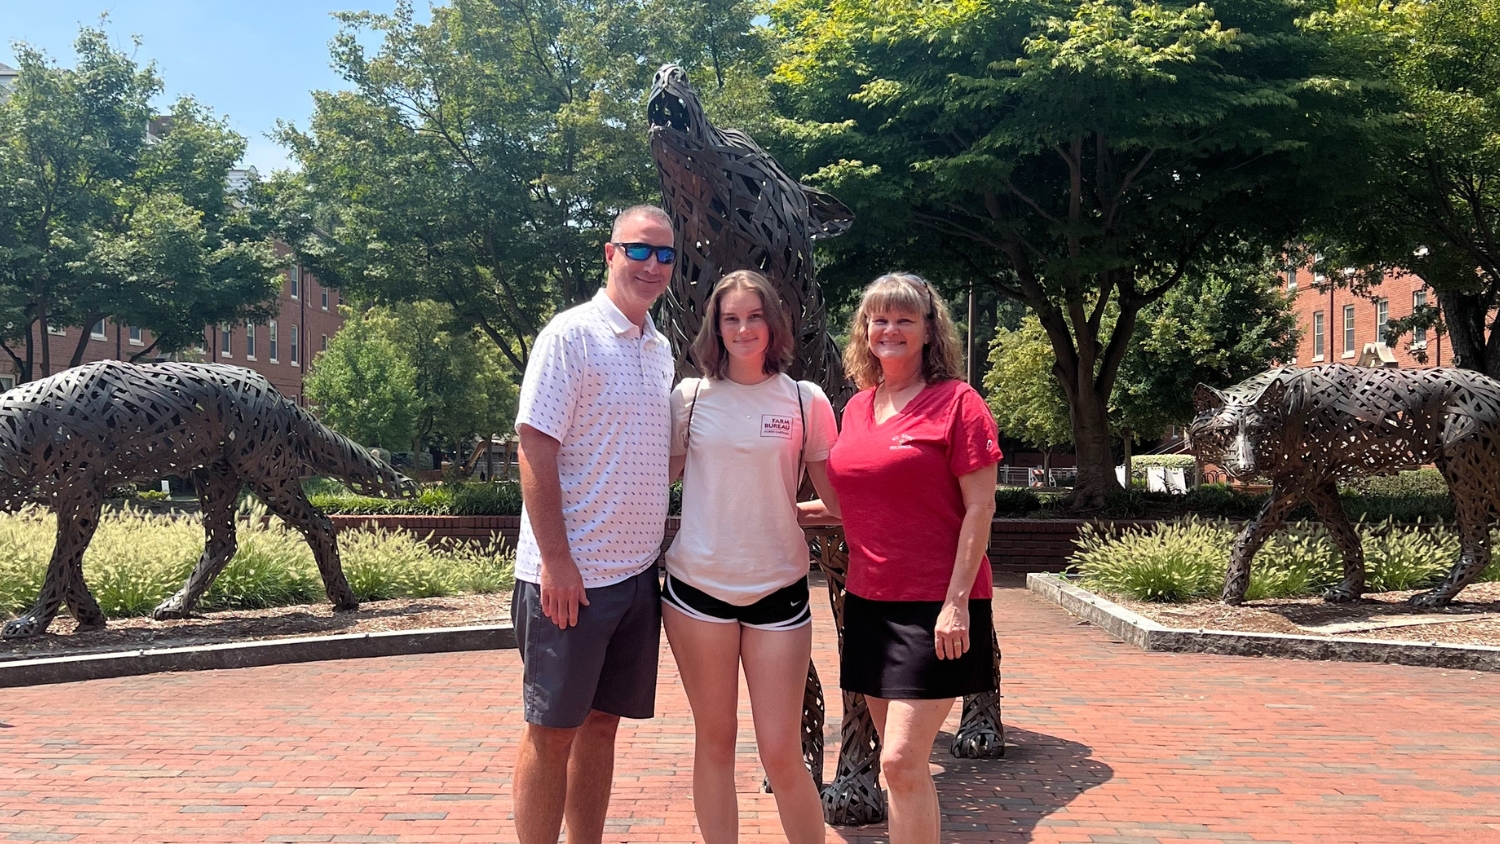 NC State freshman Sarah Bailey poses with her parents on campus.